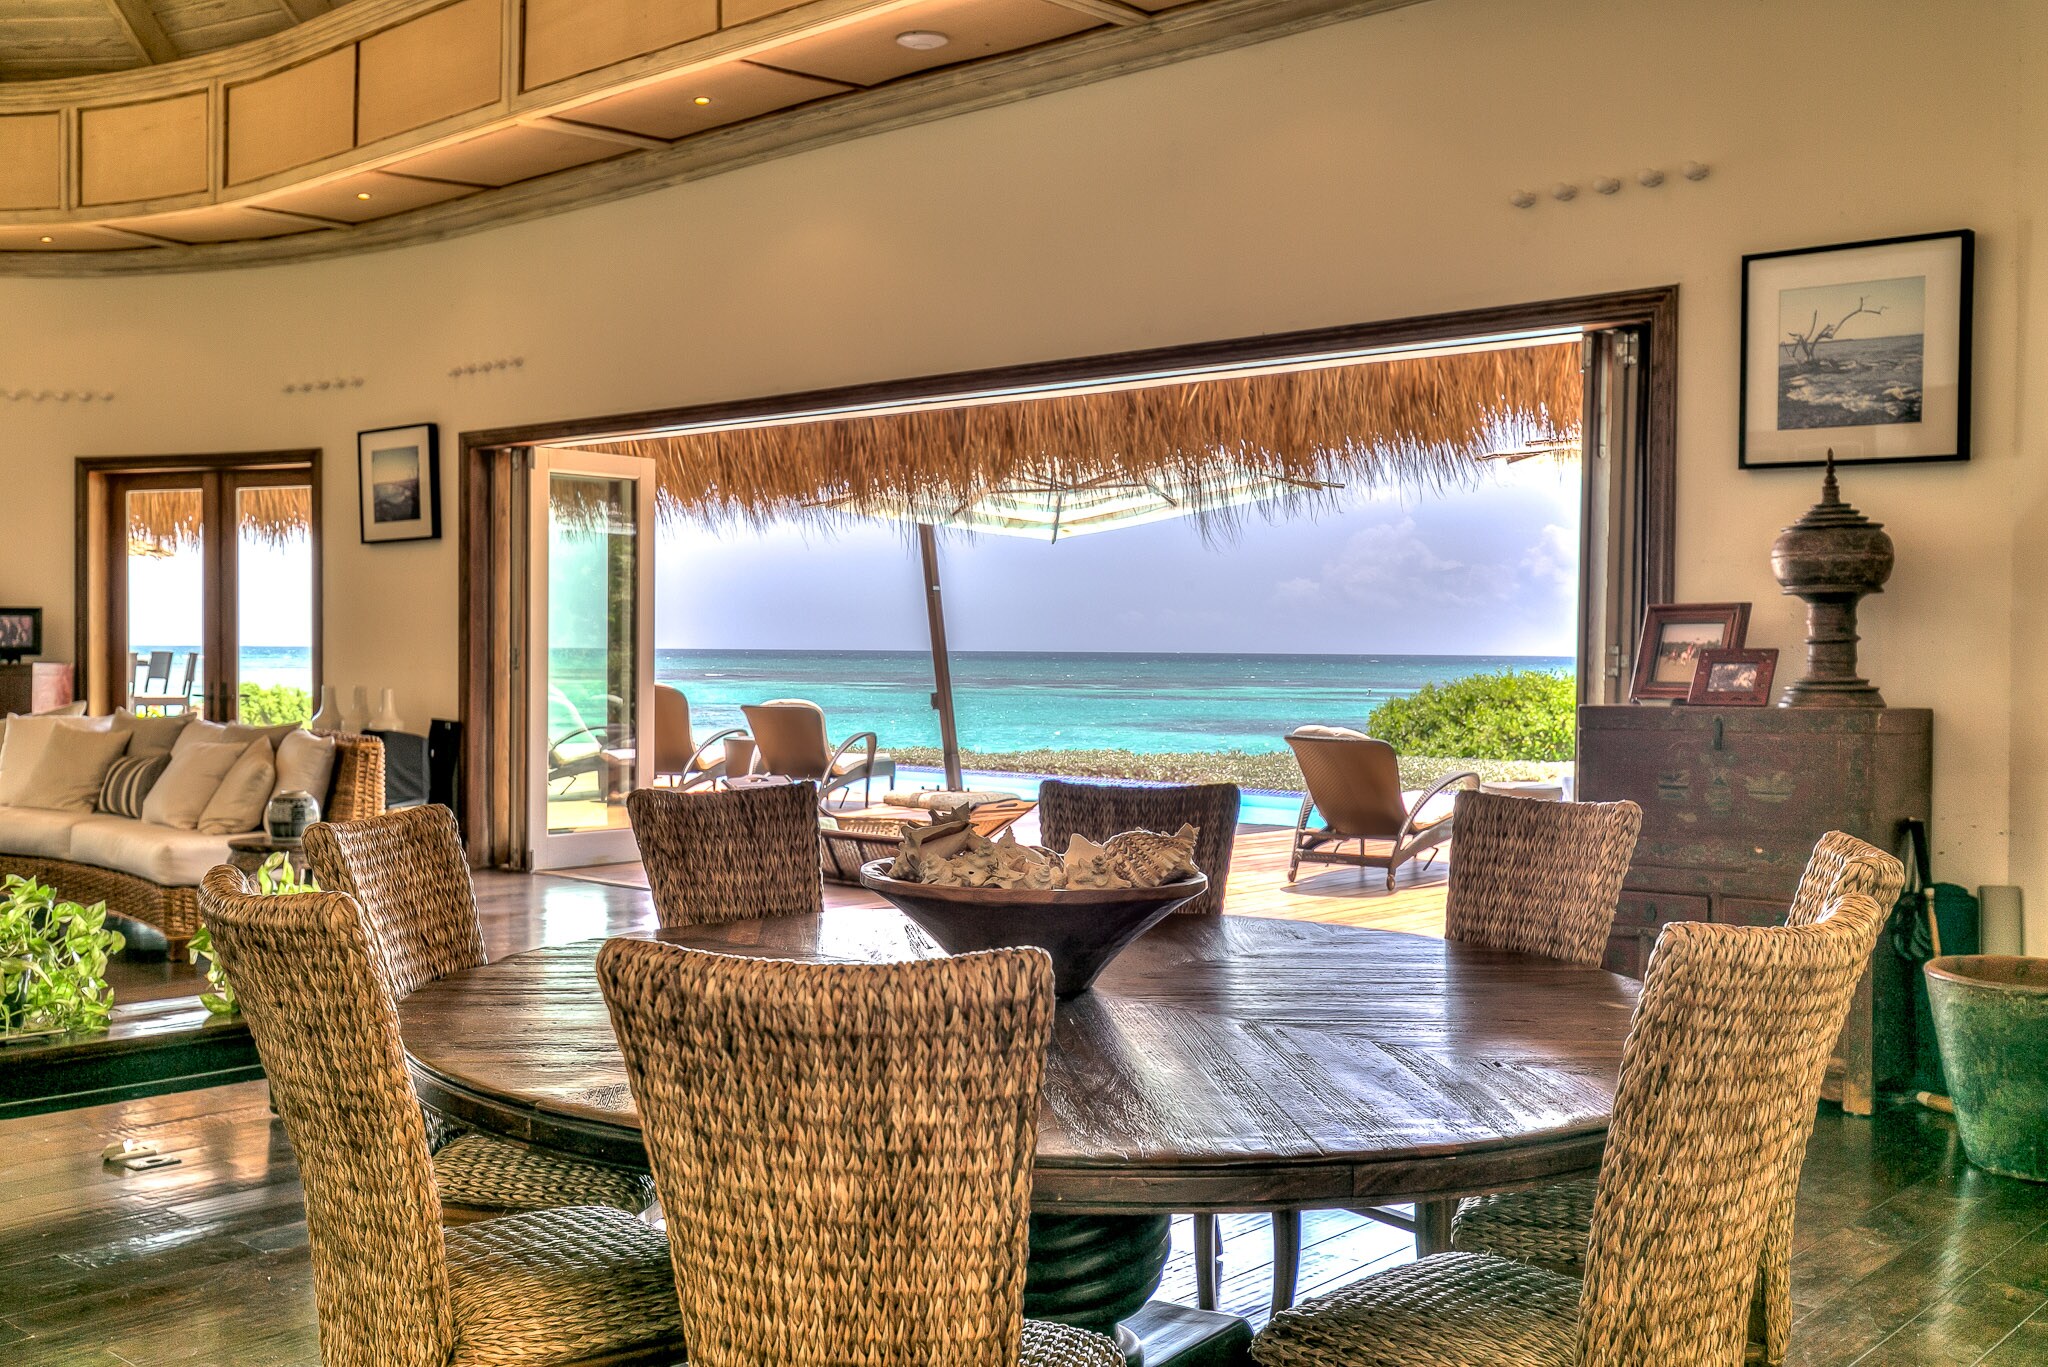 Property Image 2 - Marina 1 - Oceanfront Villa with private dock in the Marina of Punta Cana